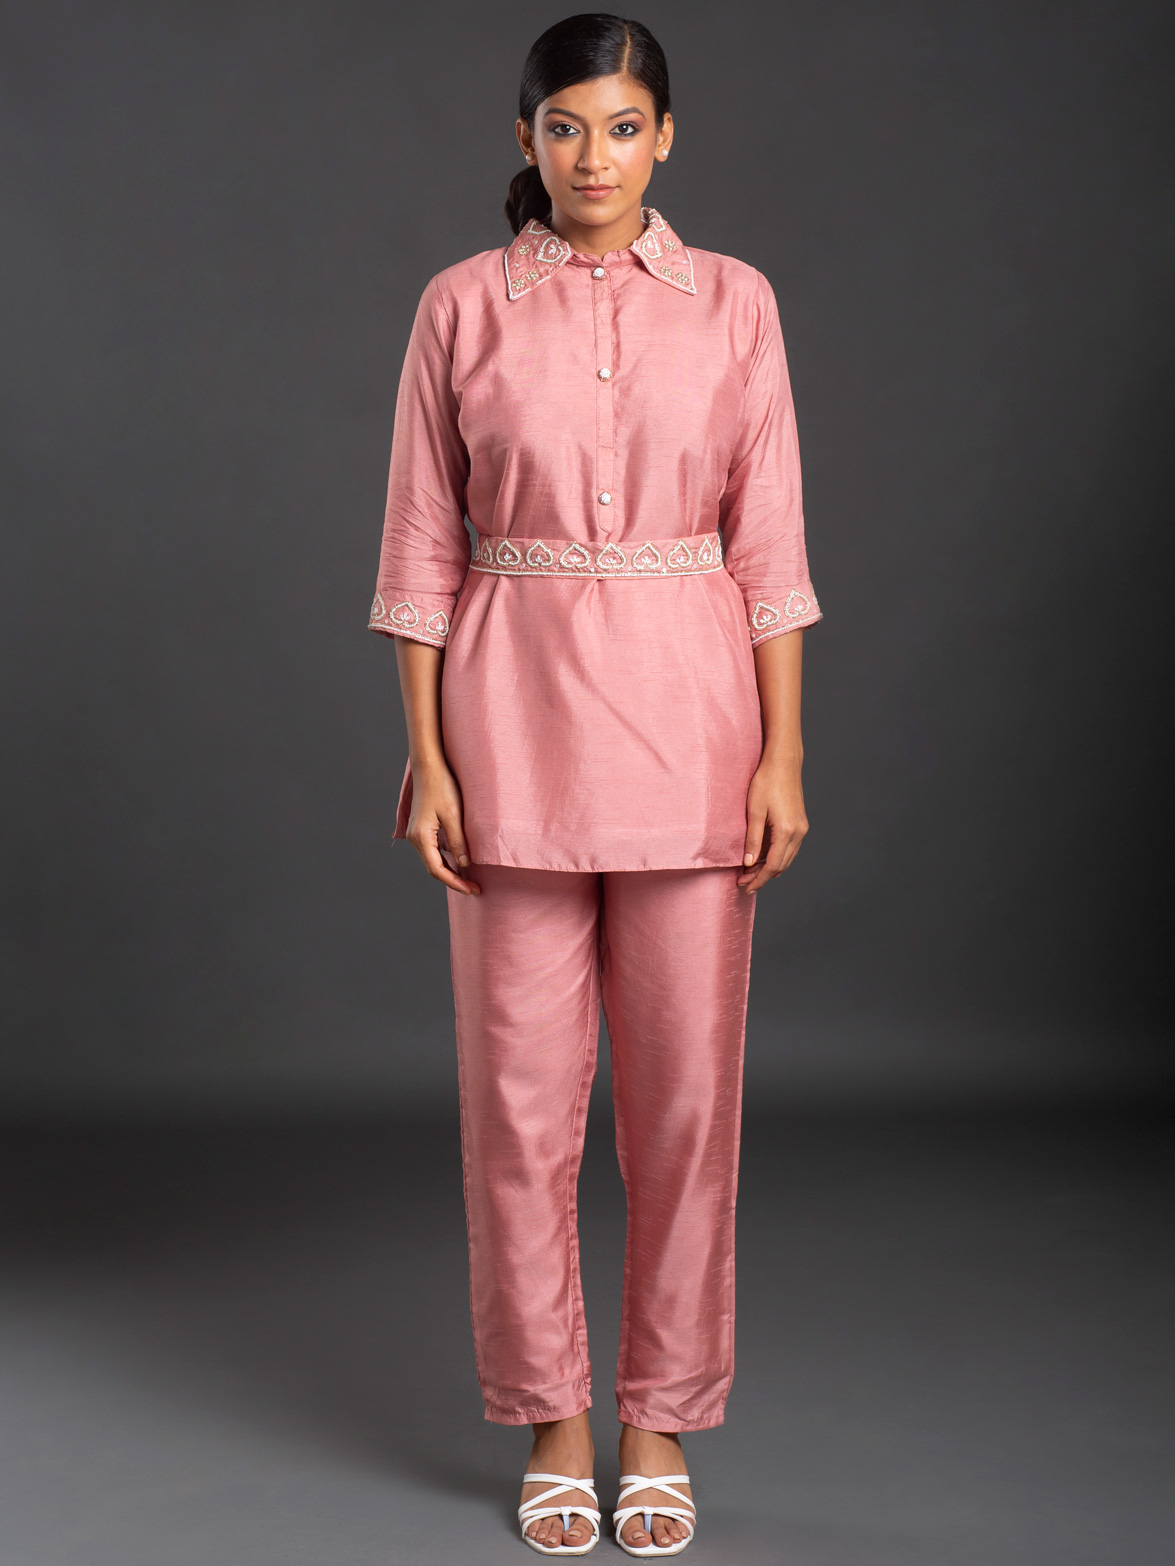 MAUVELOUS PINK EMBROIDERY CO ORD SET